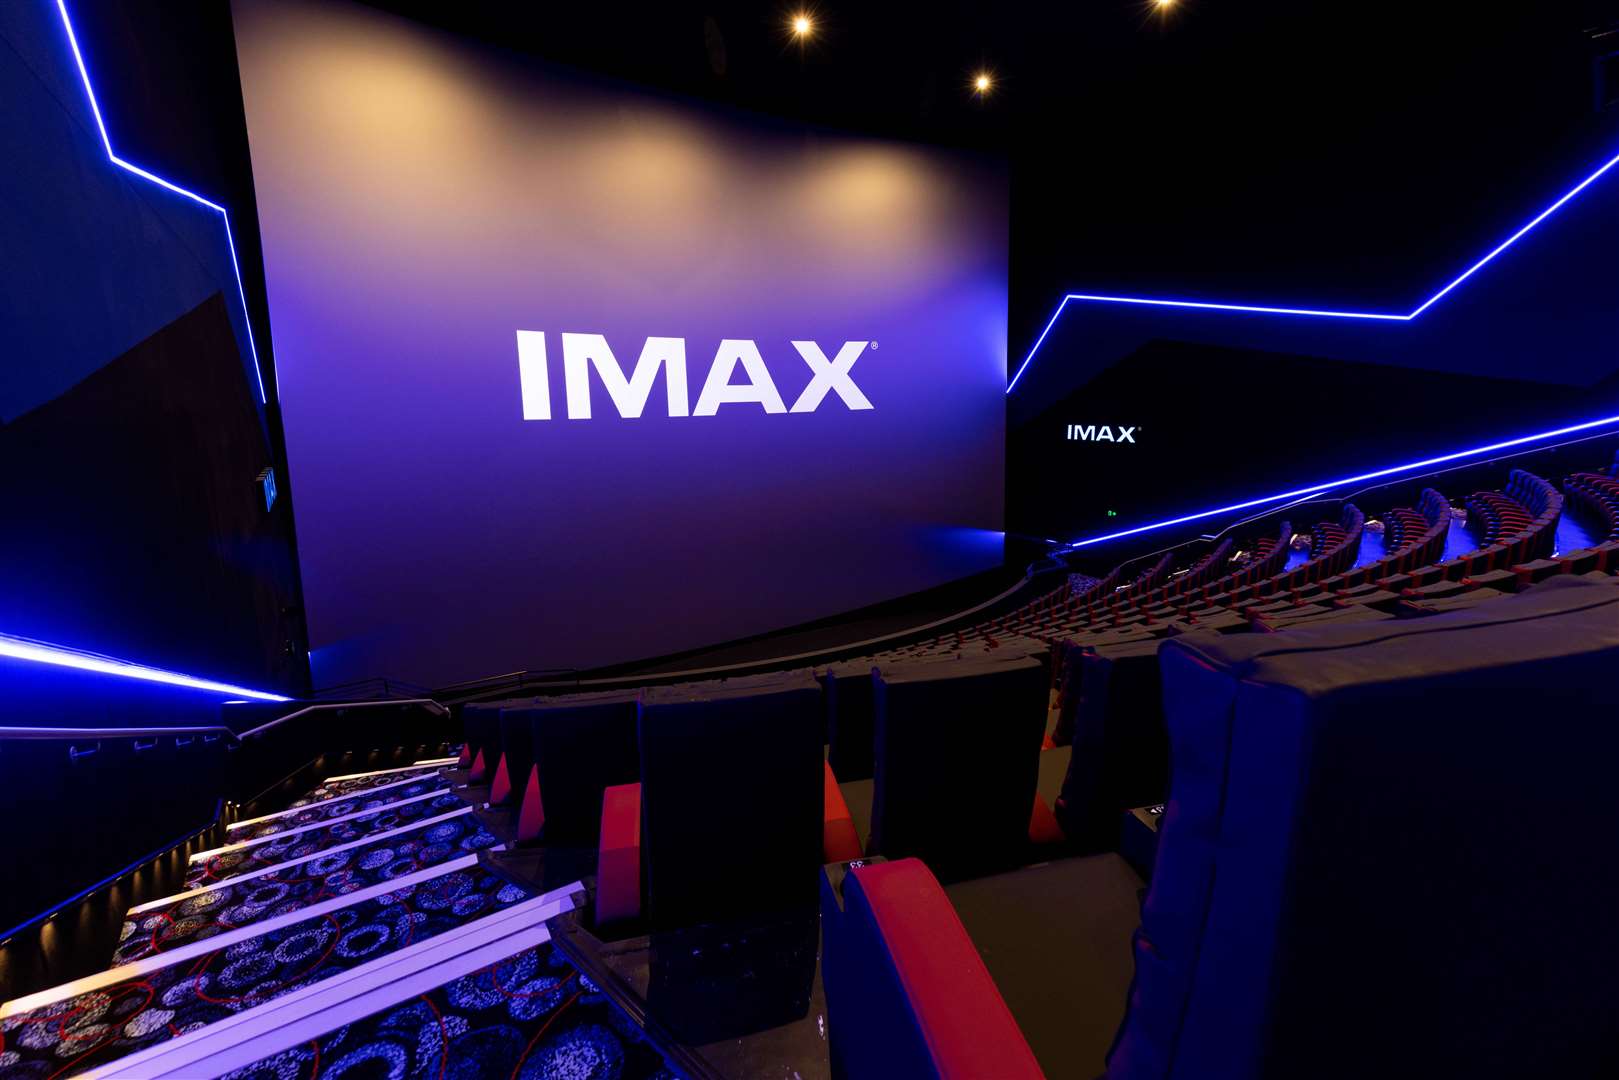 Cineworld Ashford recently opened its new 4DX, ScreenX and IMAX screens. Picture: Andrew Fosker / PinPep